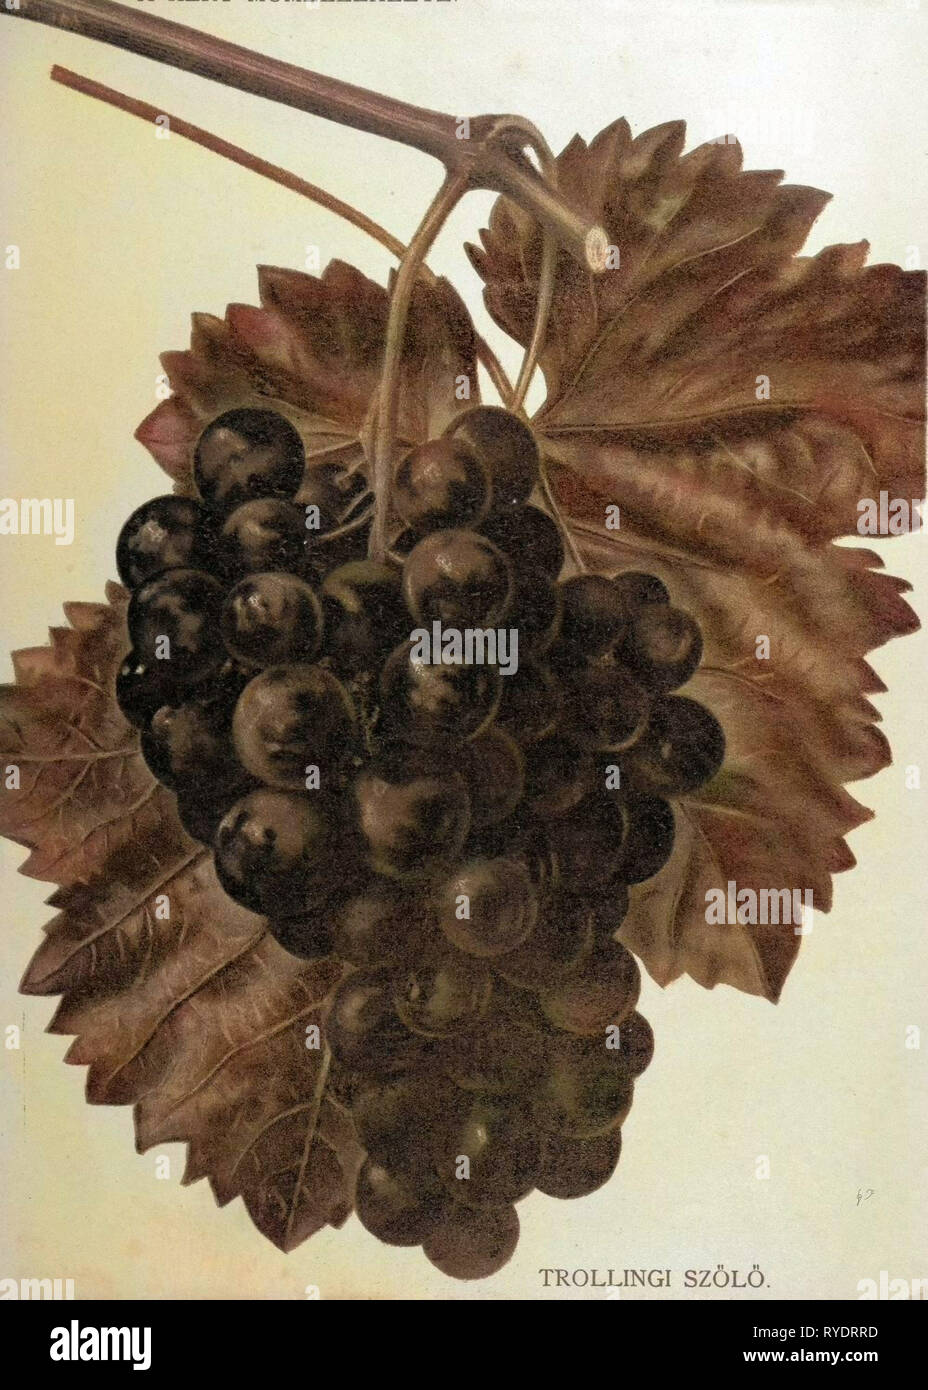 Wine Grapes, Vine, Agriculture, Fruit, Food and Drink, Grape, Plant, Ripe, Season, Natural, Viticulture, Seasonal, Taste, Juicy, Organic, 19th Century, 1800s, 1900s, Fruits,Blue Grapes, Liszt Gourmet Archive Stock Photo